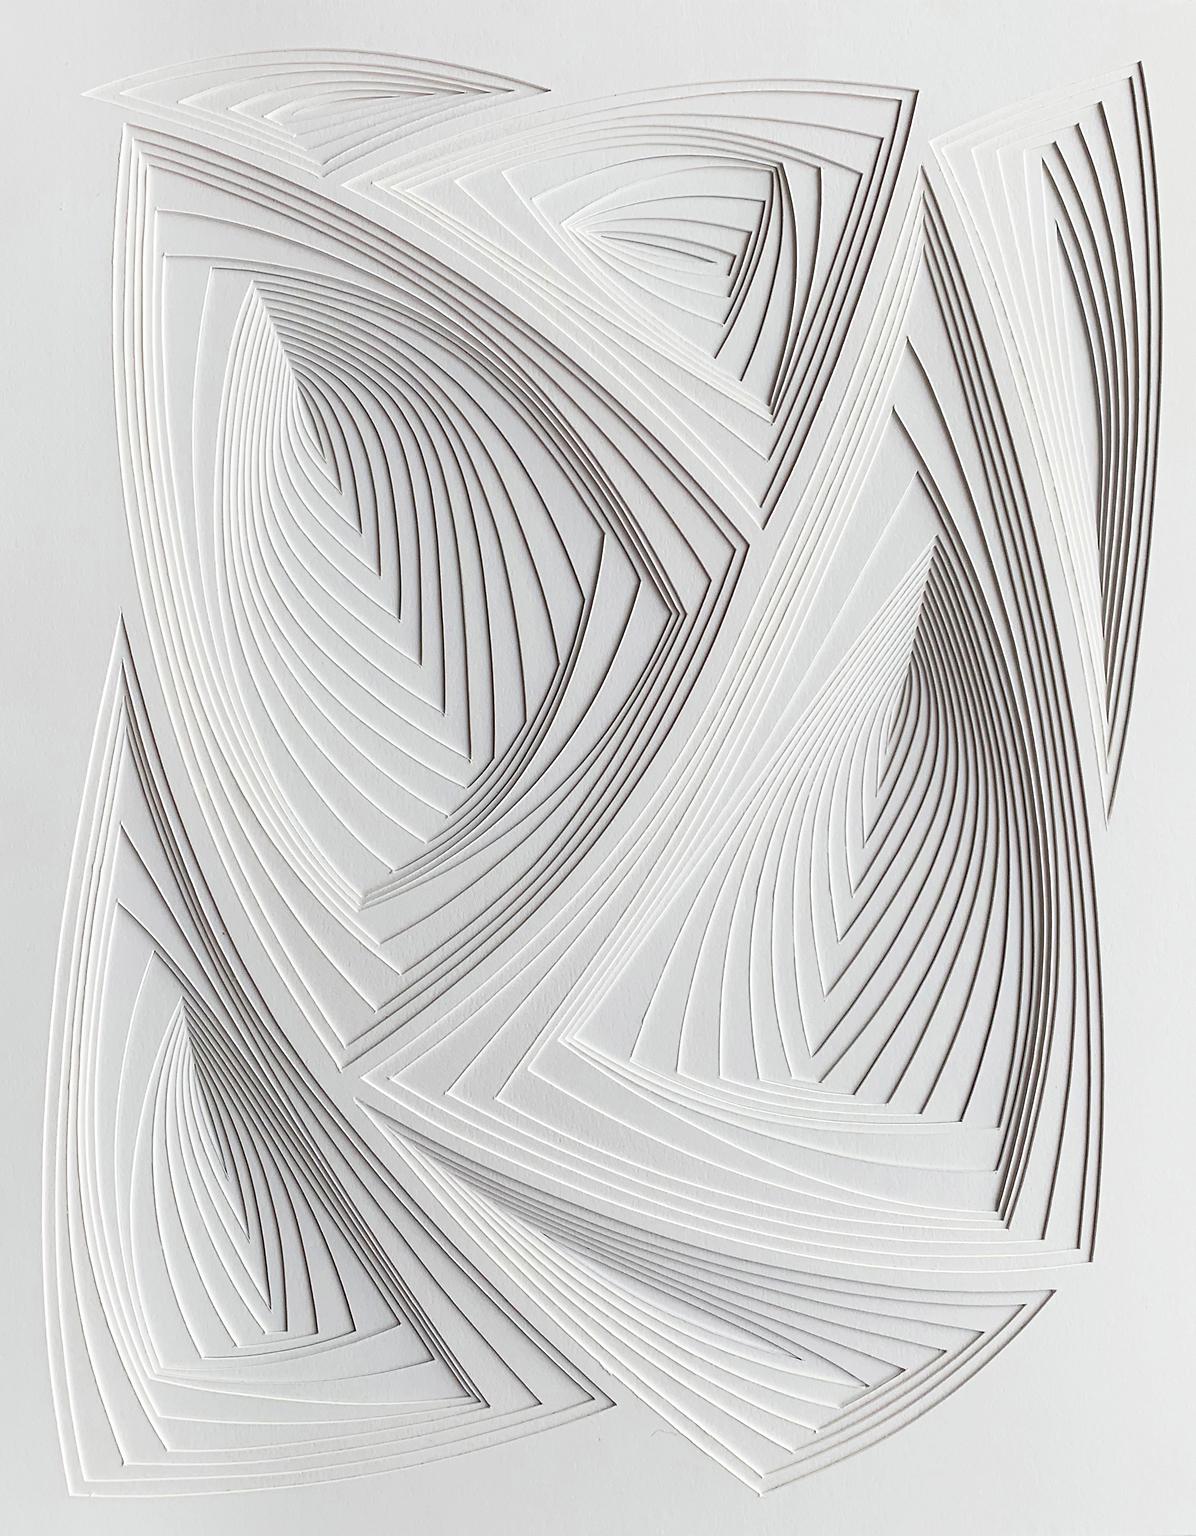 Elizabeth Gregory-Gruen Abstract Sculpture - "All Over 3", Free Hand Cut Paper Wall Relief Sculpture, Abstract, Tonal, White